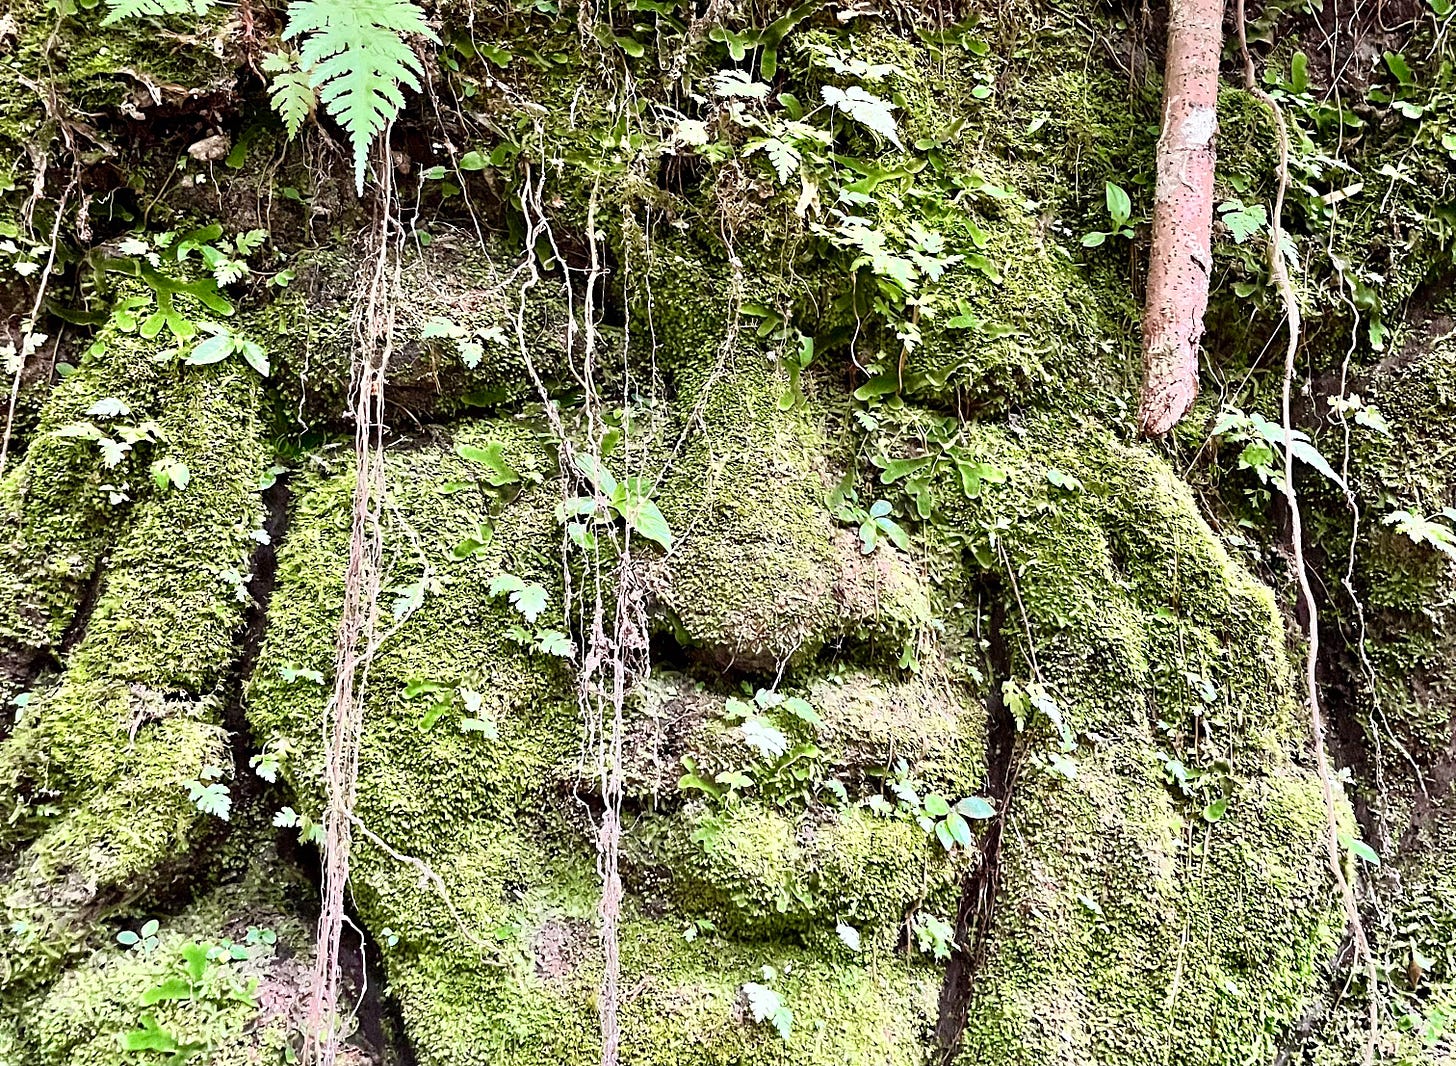 A face carved into a rock face